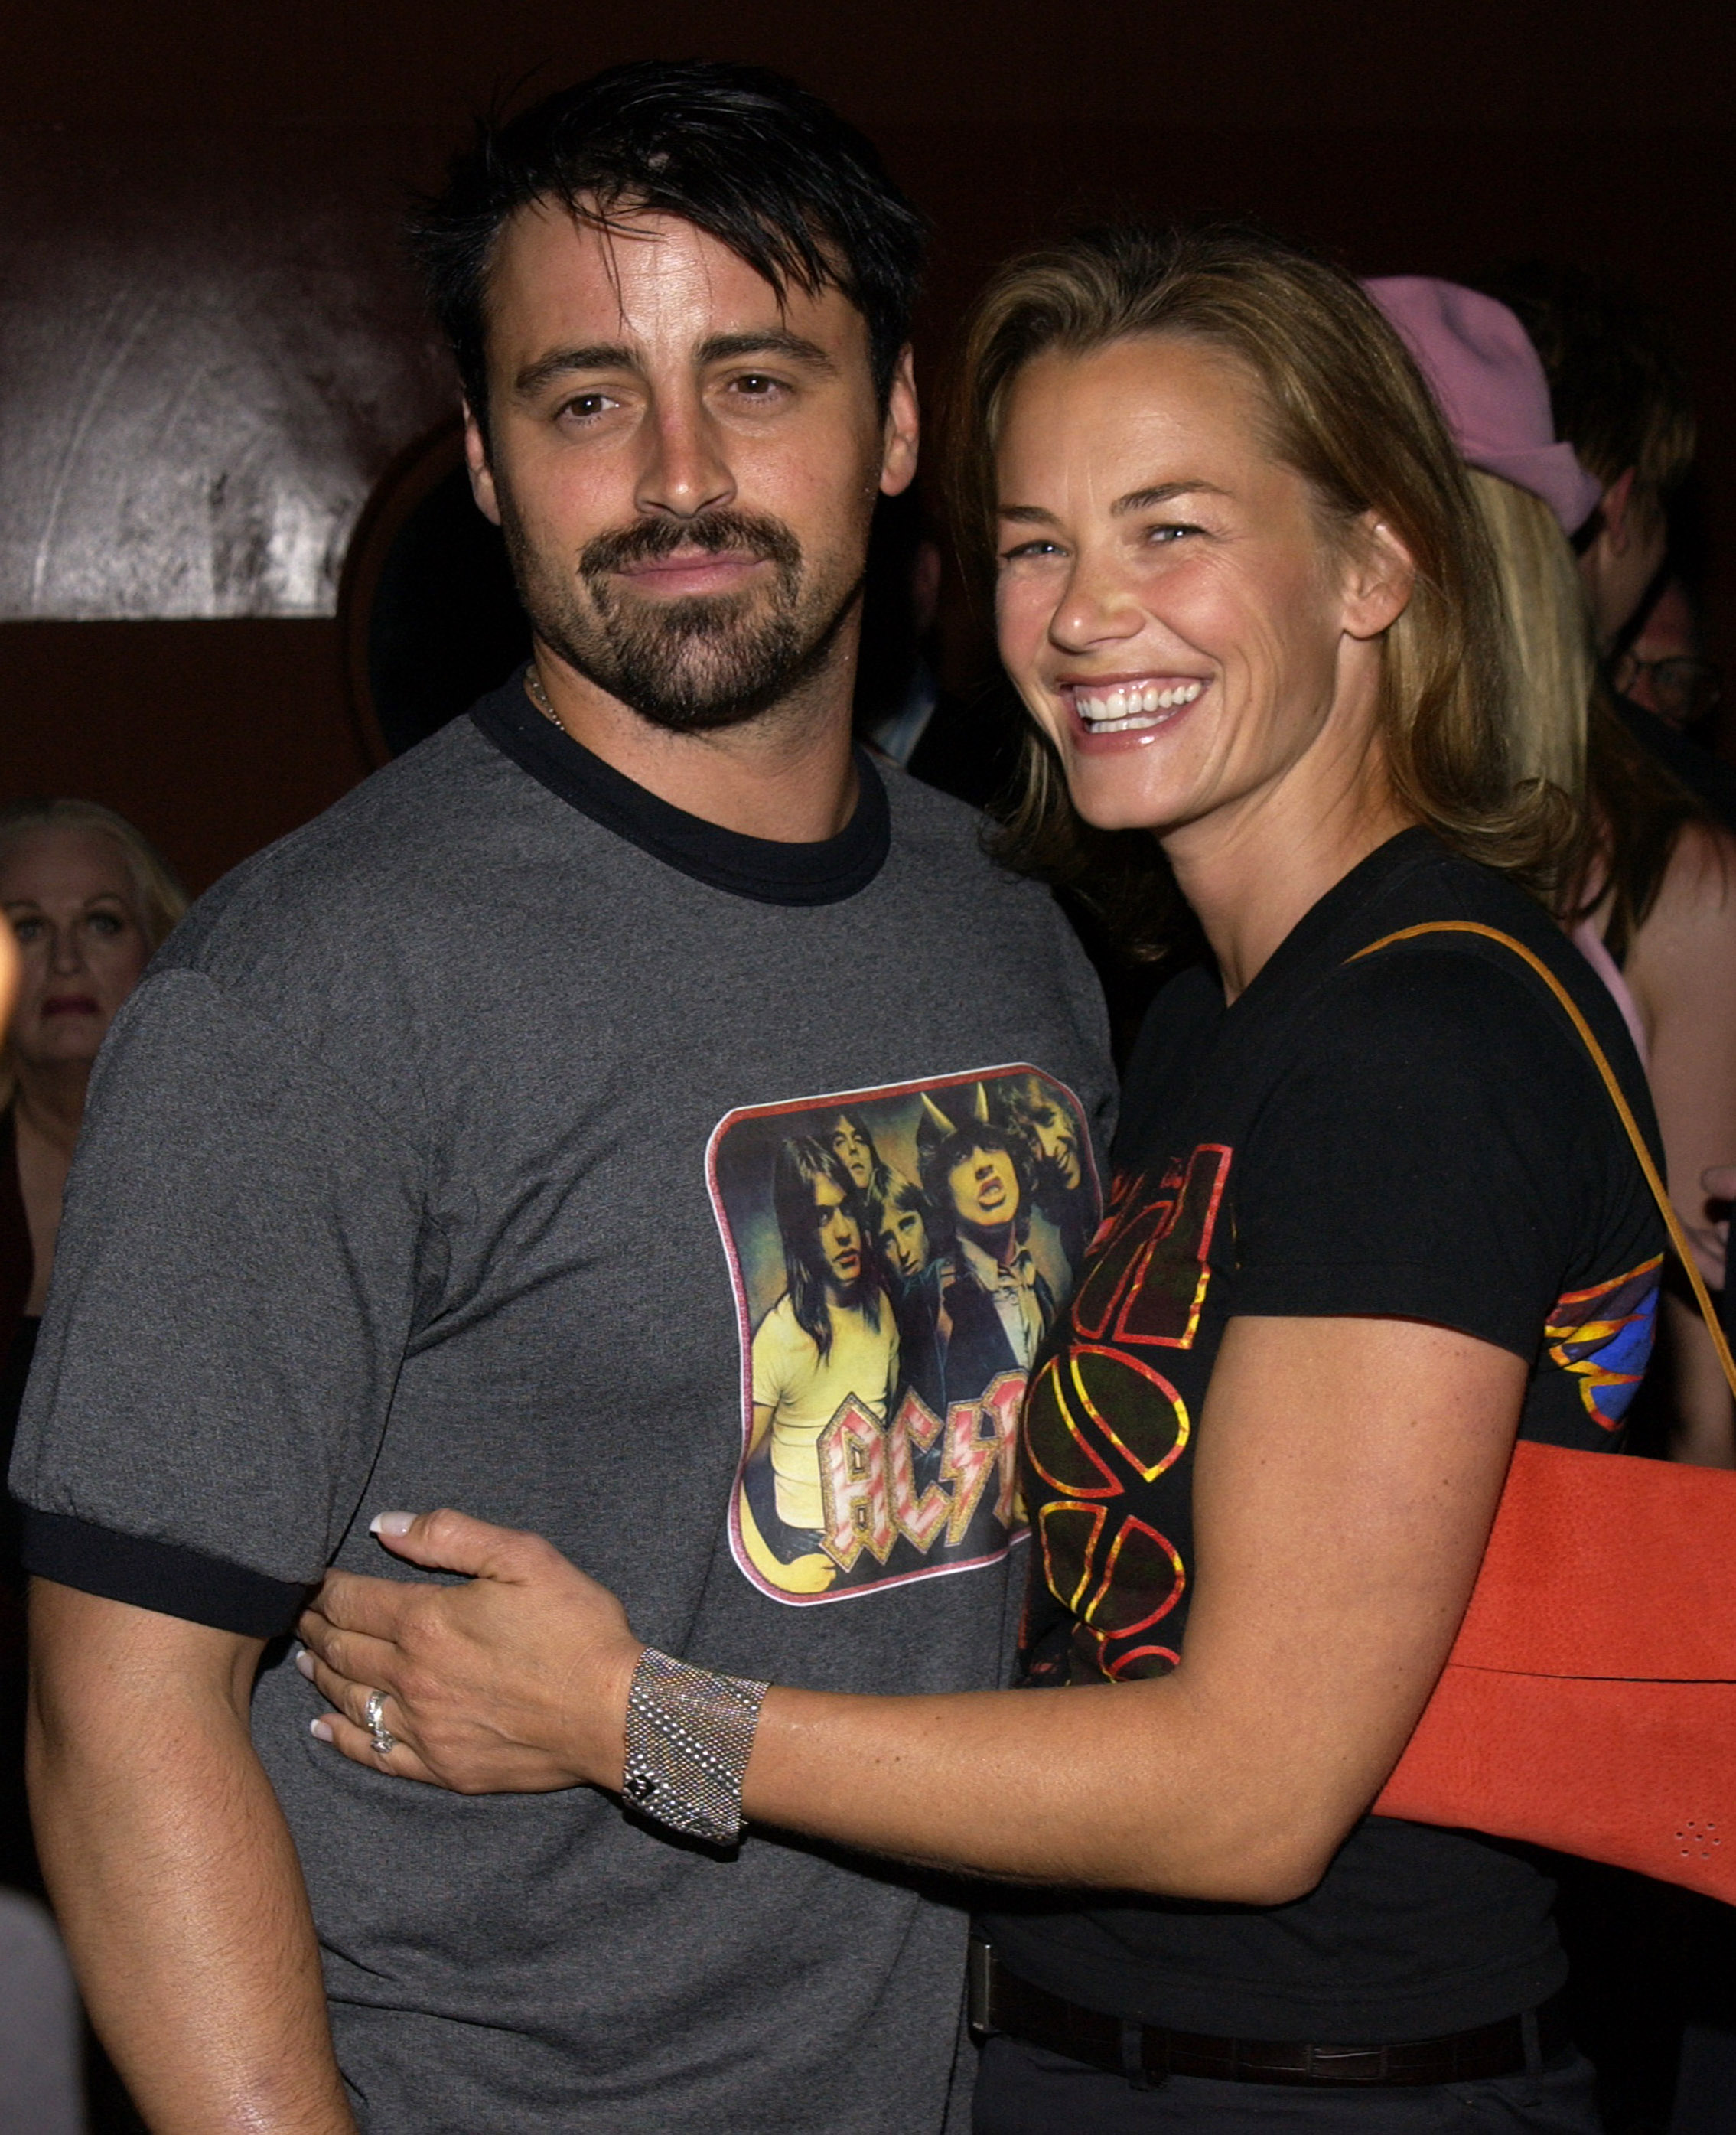 Matt LeBlanc and Melissa McKnight at the "Mayor Of The Sunset Strip" premier in Los Angeles in 2003 | Source: Getty Images